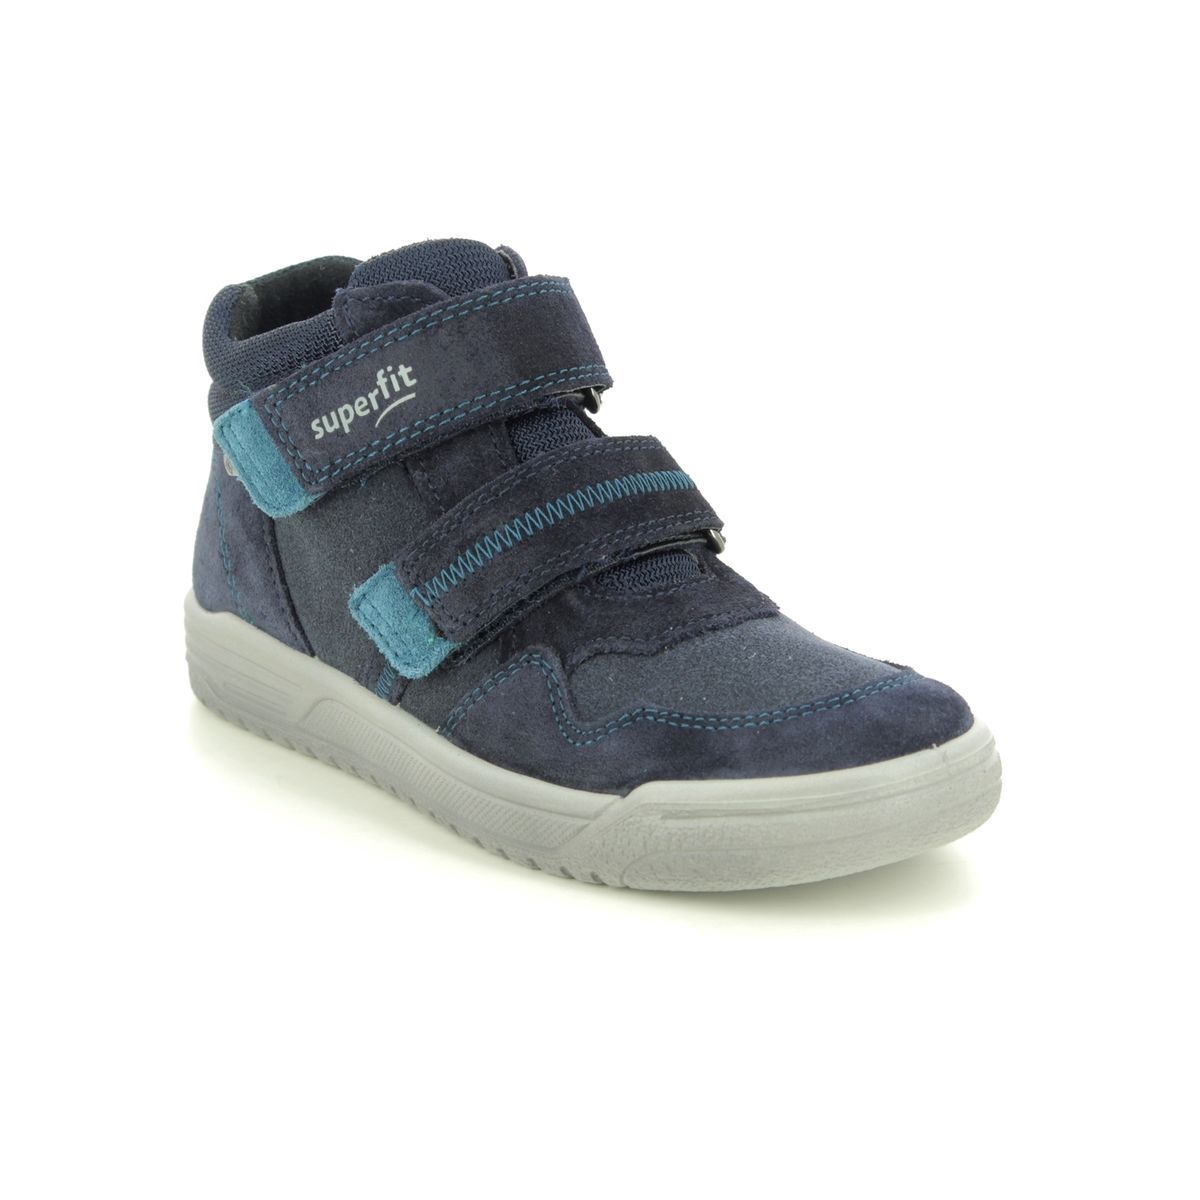 Superfit Earth Gtx Vel Navy Suede Kids Boys Boots 1009057-8000 In Size 30 In Plain Navy Suede For kids